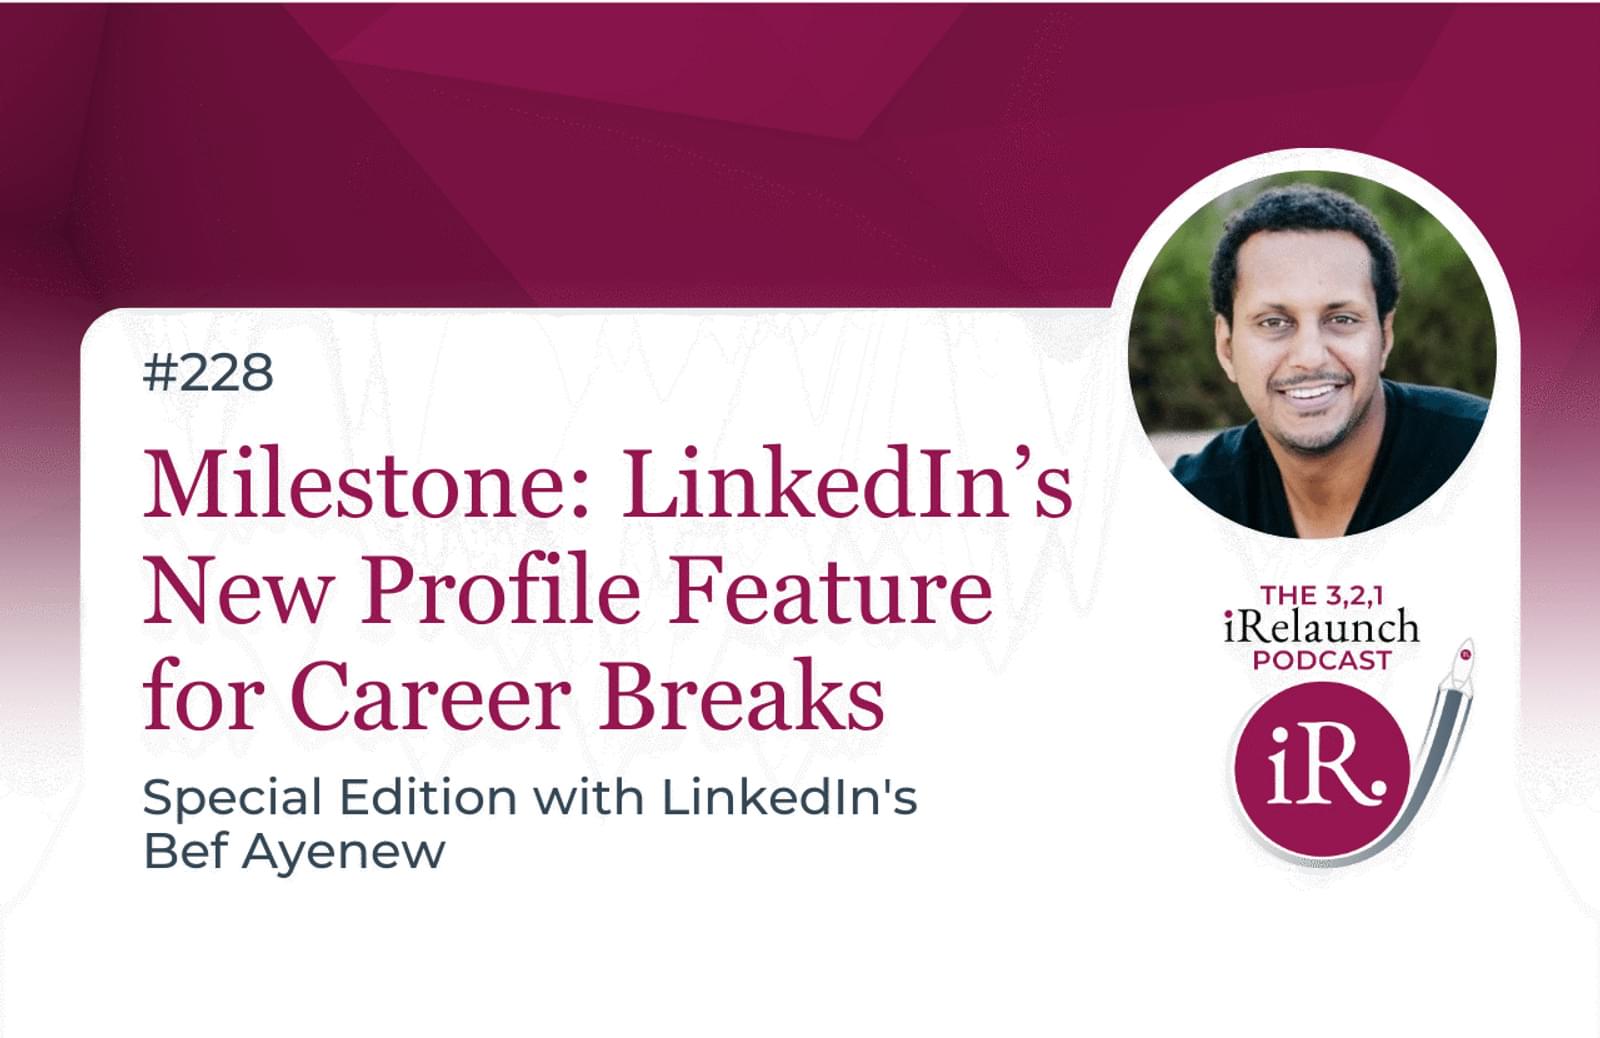 3, 2, 1 iRelaunch Podcast Thumbnail for Episode #228 with Bef Ayenew's headshot. The episode's title is: "Milestone: LinkedIn’s New Profile Feature for Career Breaks," Special Edition with LinkedIn's Bef Ayenew